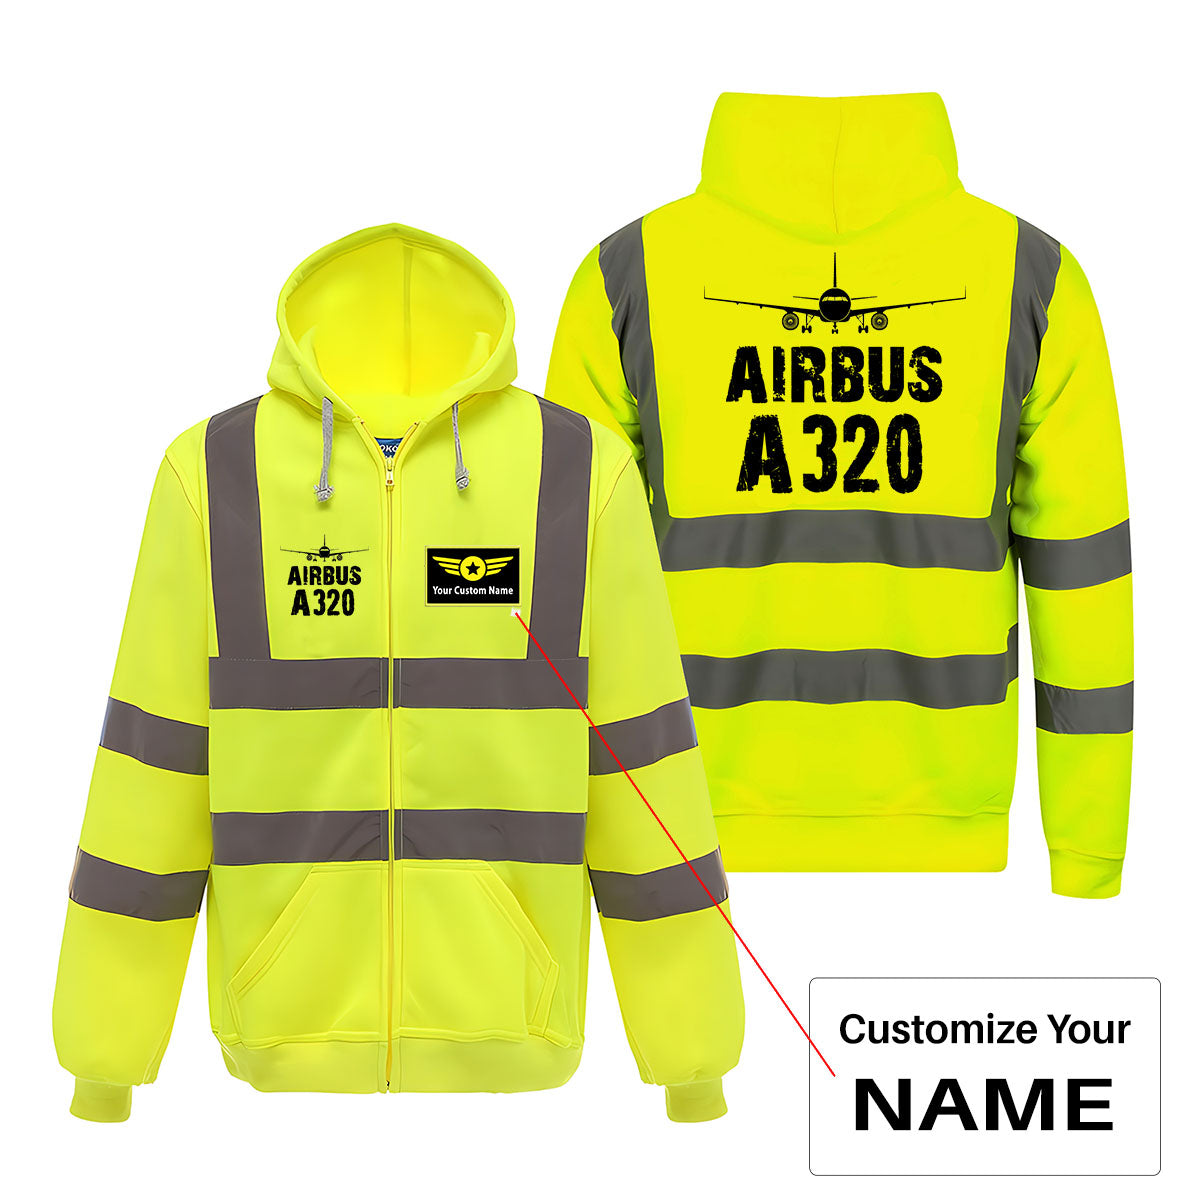 Airbus A320 & Plane Designed Reflective Zipped Hoodies